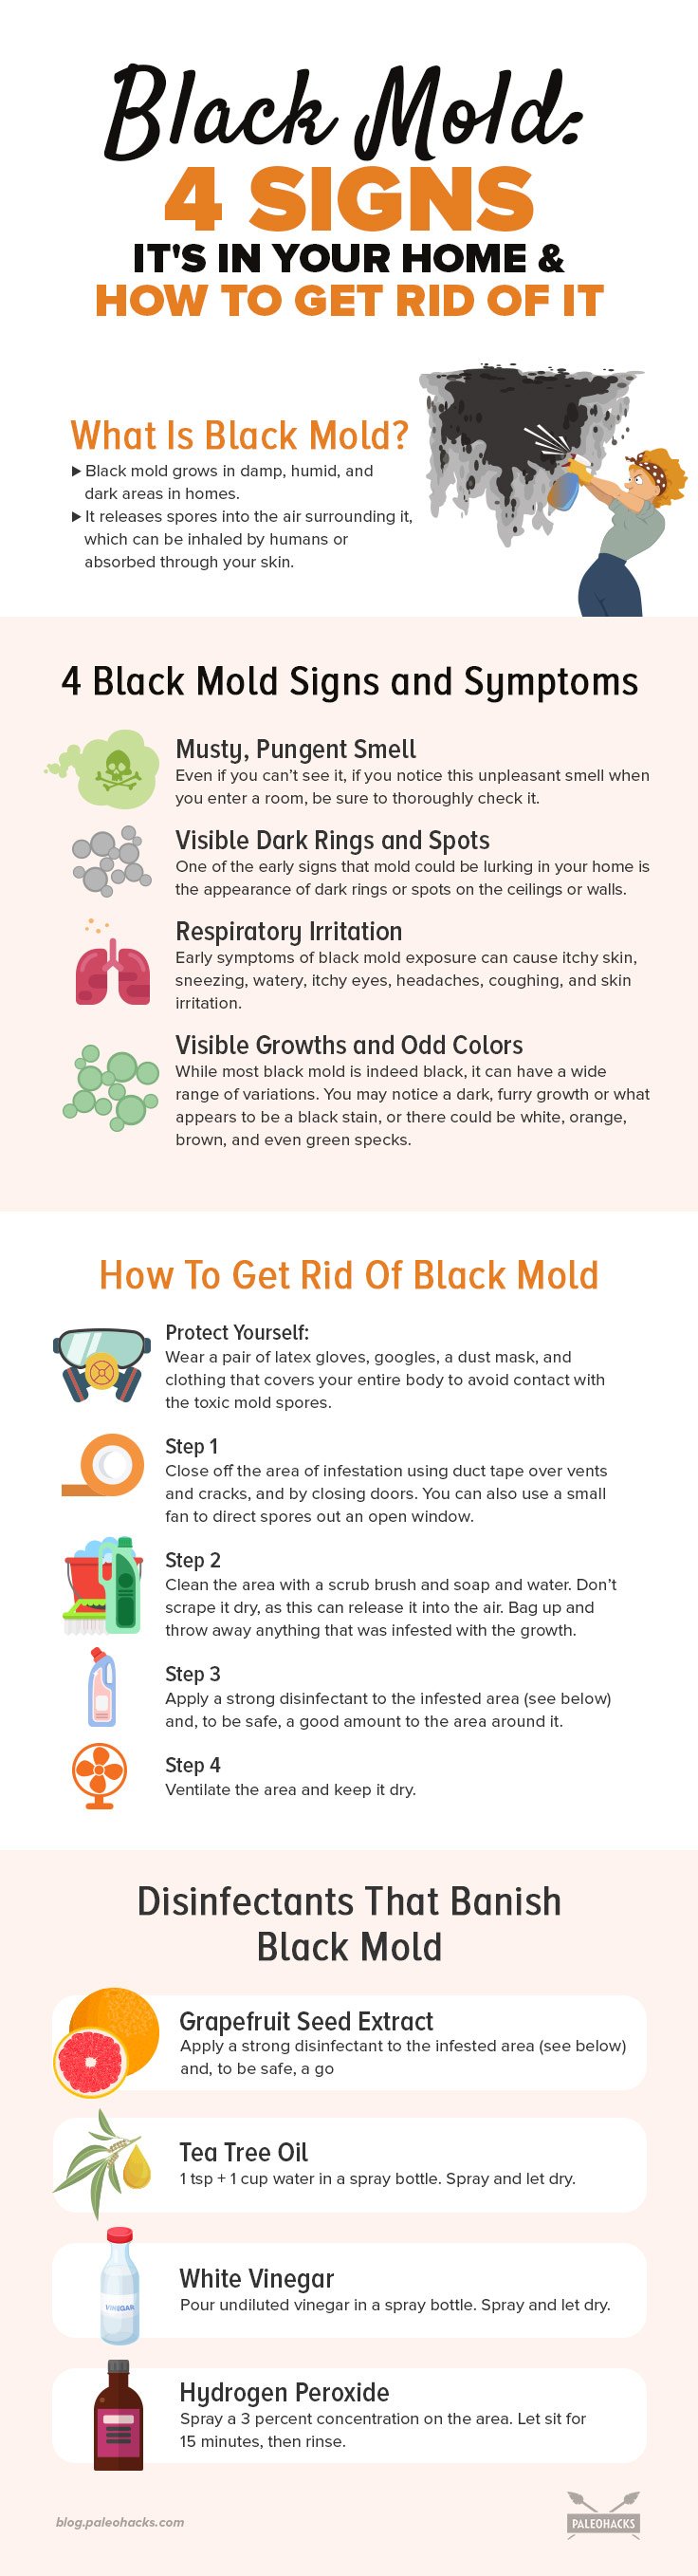 Finding or suspecting you have a black mold infestation in your home can often leave you with a feeling of panic. Just how toxic is black mold?